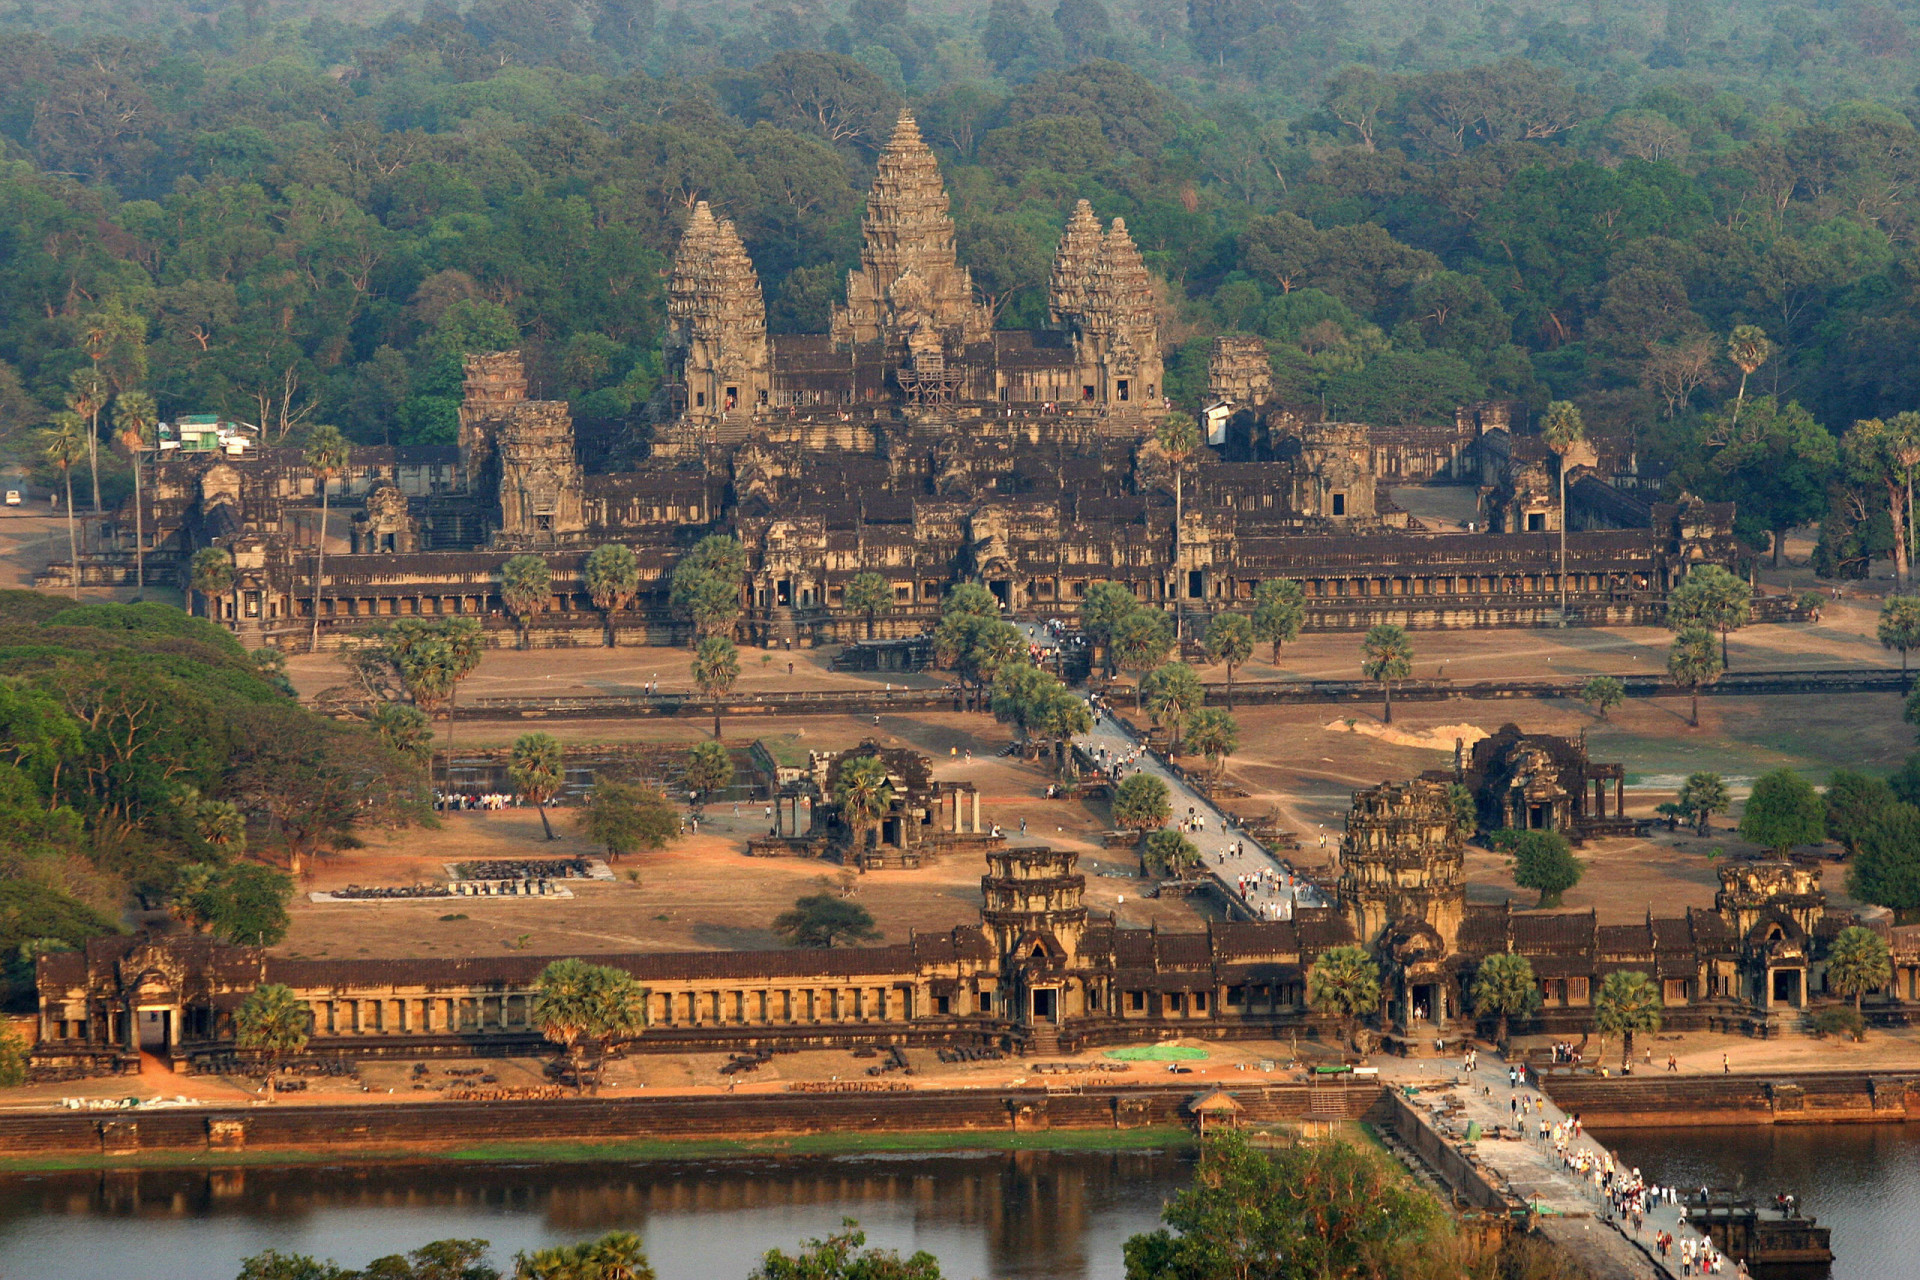 <p>Organized by the DreamMaker company for up to 50 people, this trip visits 20 cities, and goes to sites such as the Angkor ruins in Cambodia. Travel is on a private plane, and the trip costs a whopping US$18 million!</p><p>You may also like:<a href="https://www.starsinsider.com/n/459039?utm_source=msn.com&utm_medium=display&utm_campaign=referral_description&utm_content=555492en-us"> The most iconic tattoos in sports history</a></p>